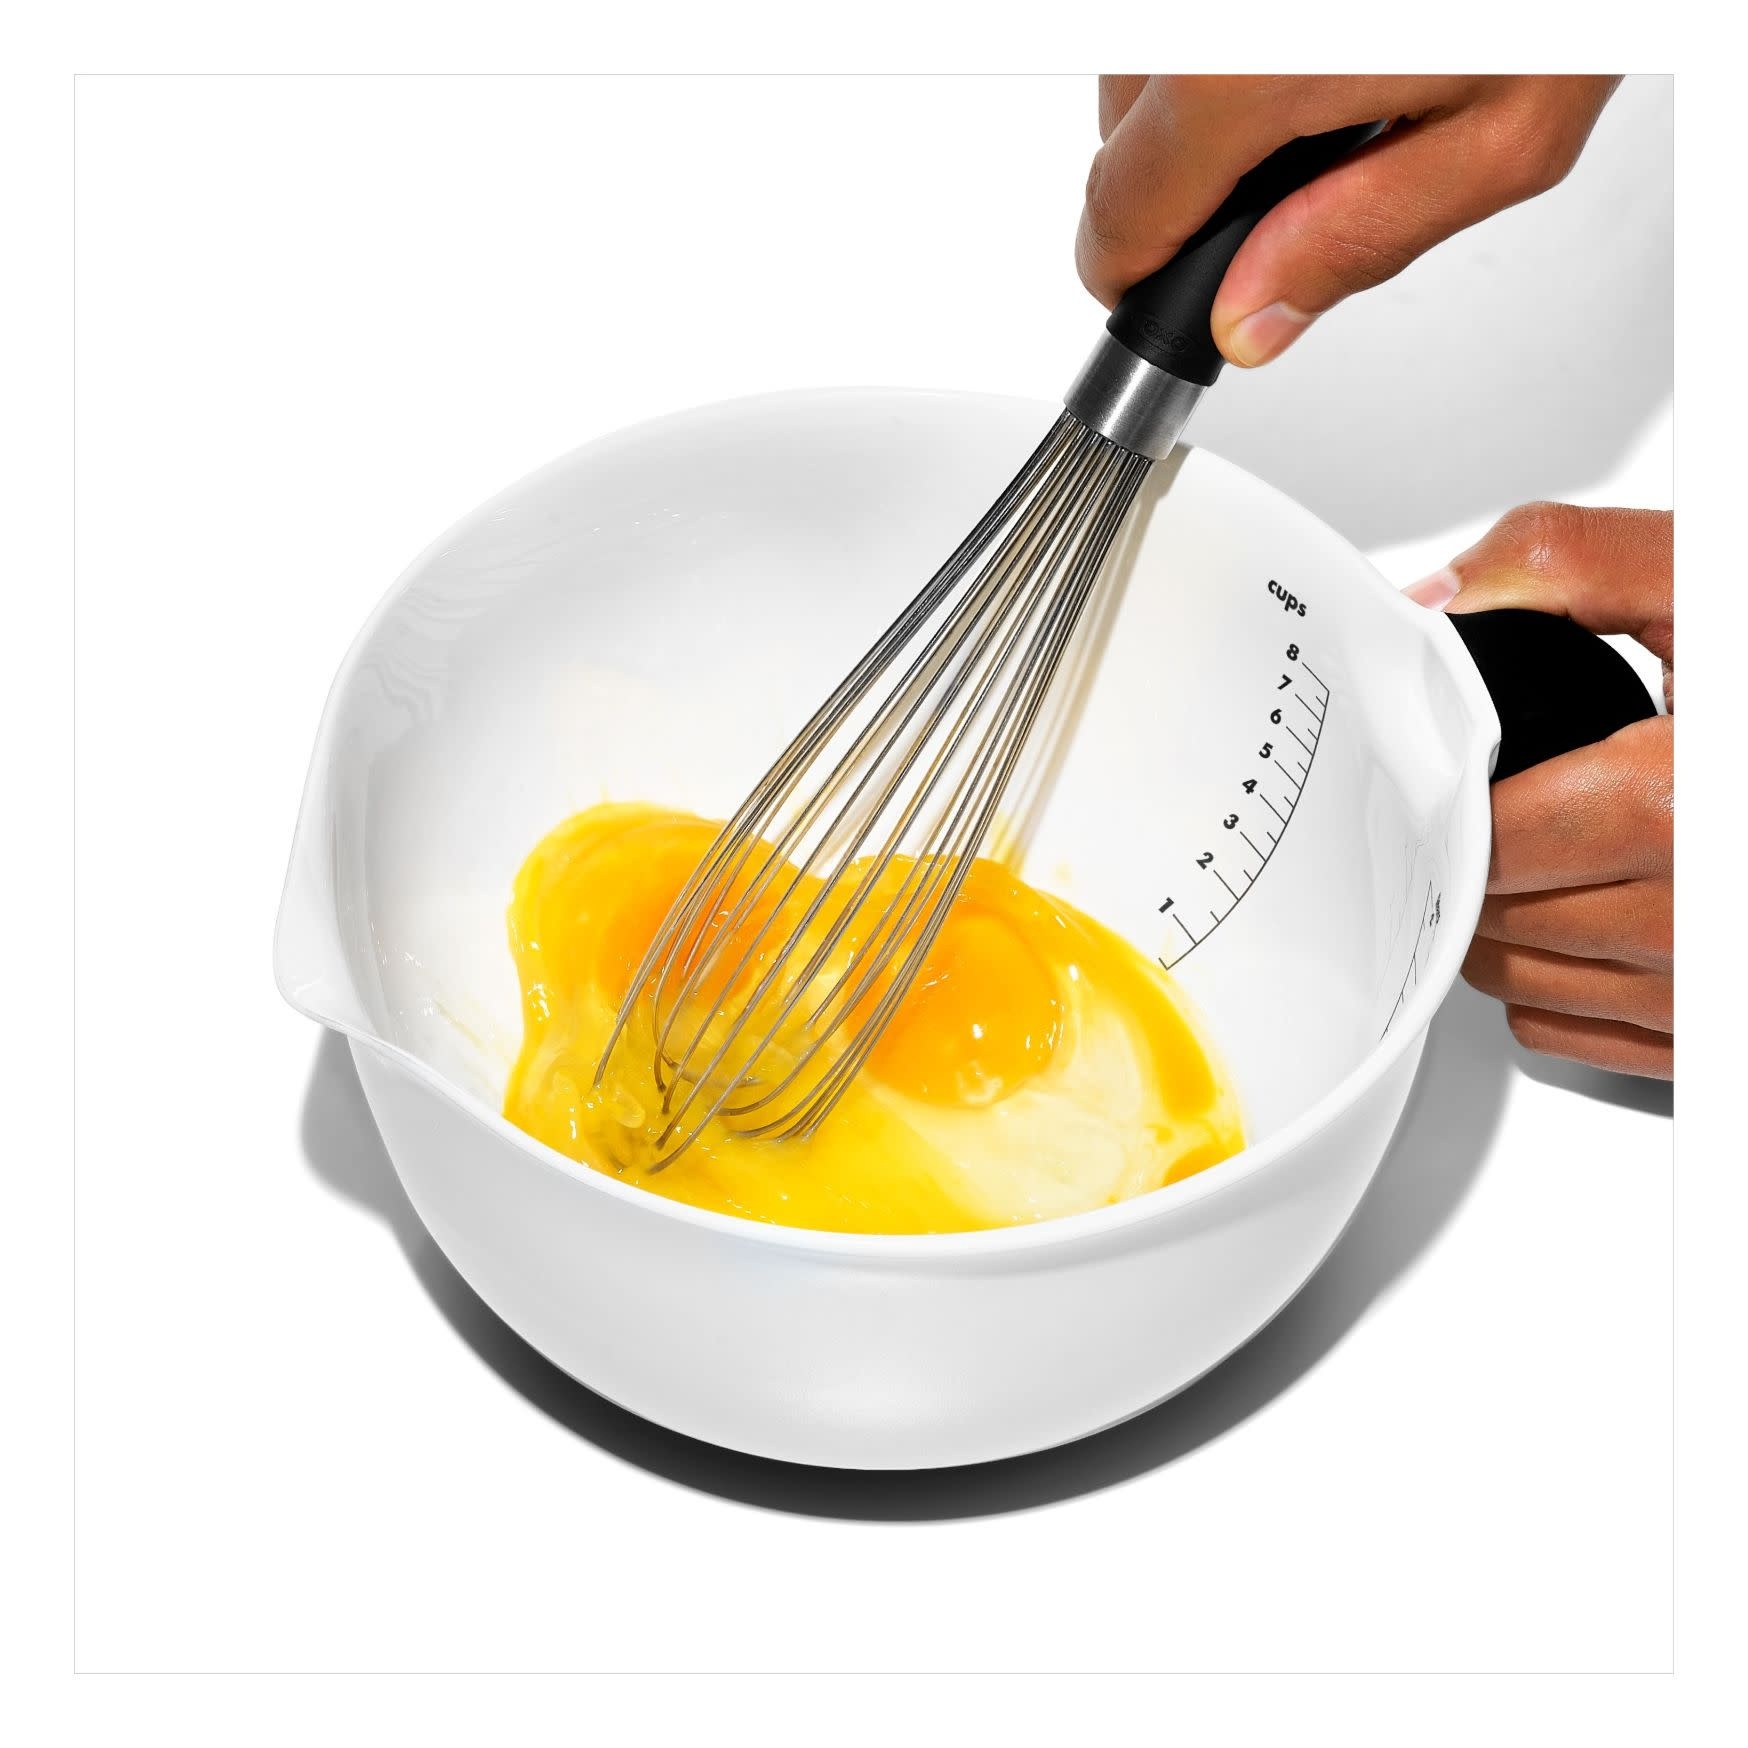 OXO Good Grips Batter Bowl - Spoons N Spice